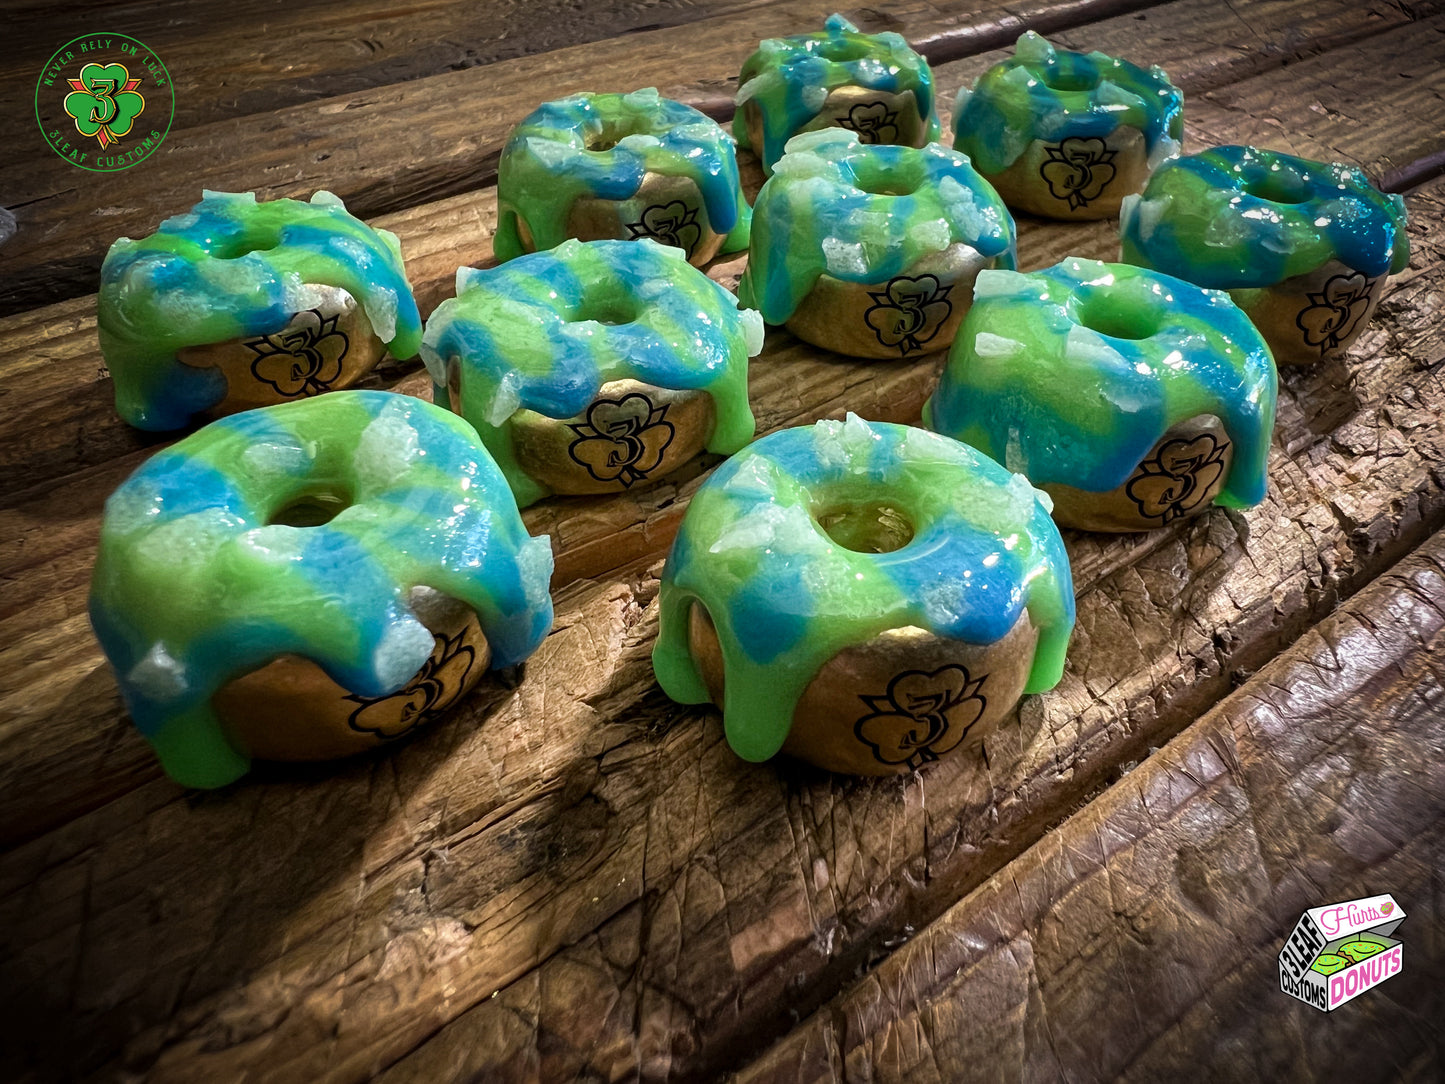 Special Edition Hurts Donuts Green & Blue w/ Glow Glass Sprinkles